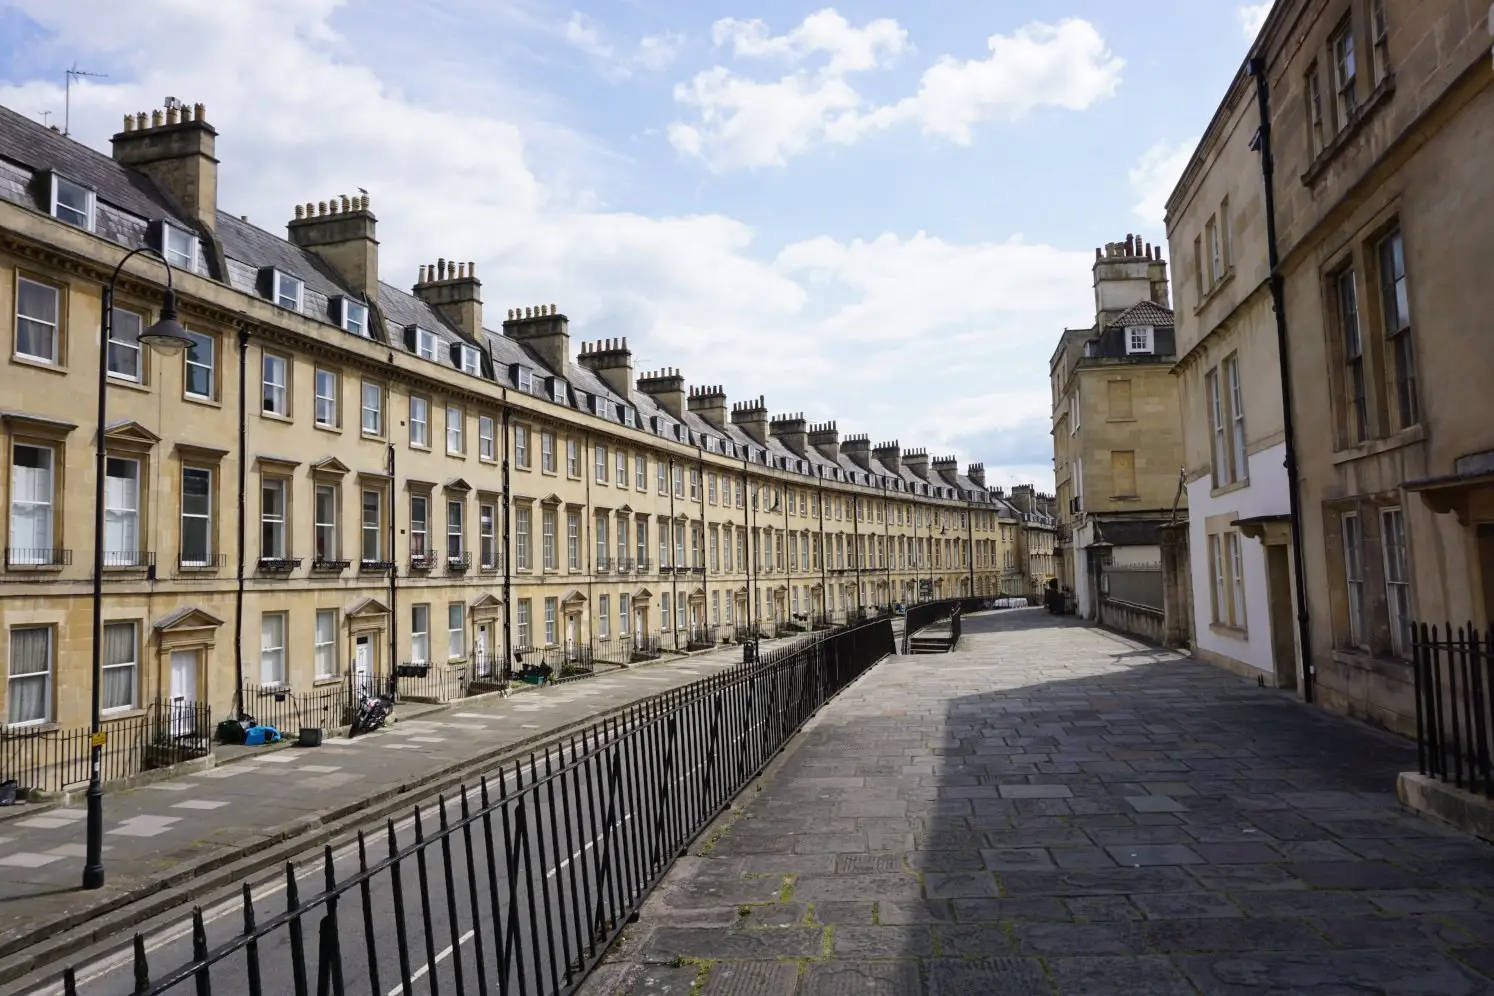 The Paragon, an impressive curved street of Georgian town houses, and a stop in the Bath walking tour